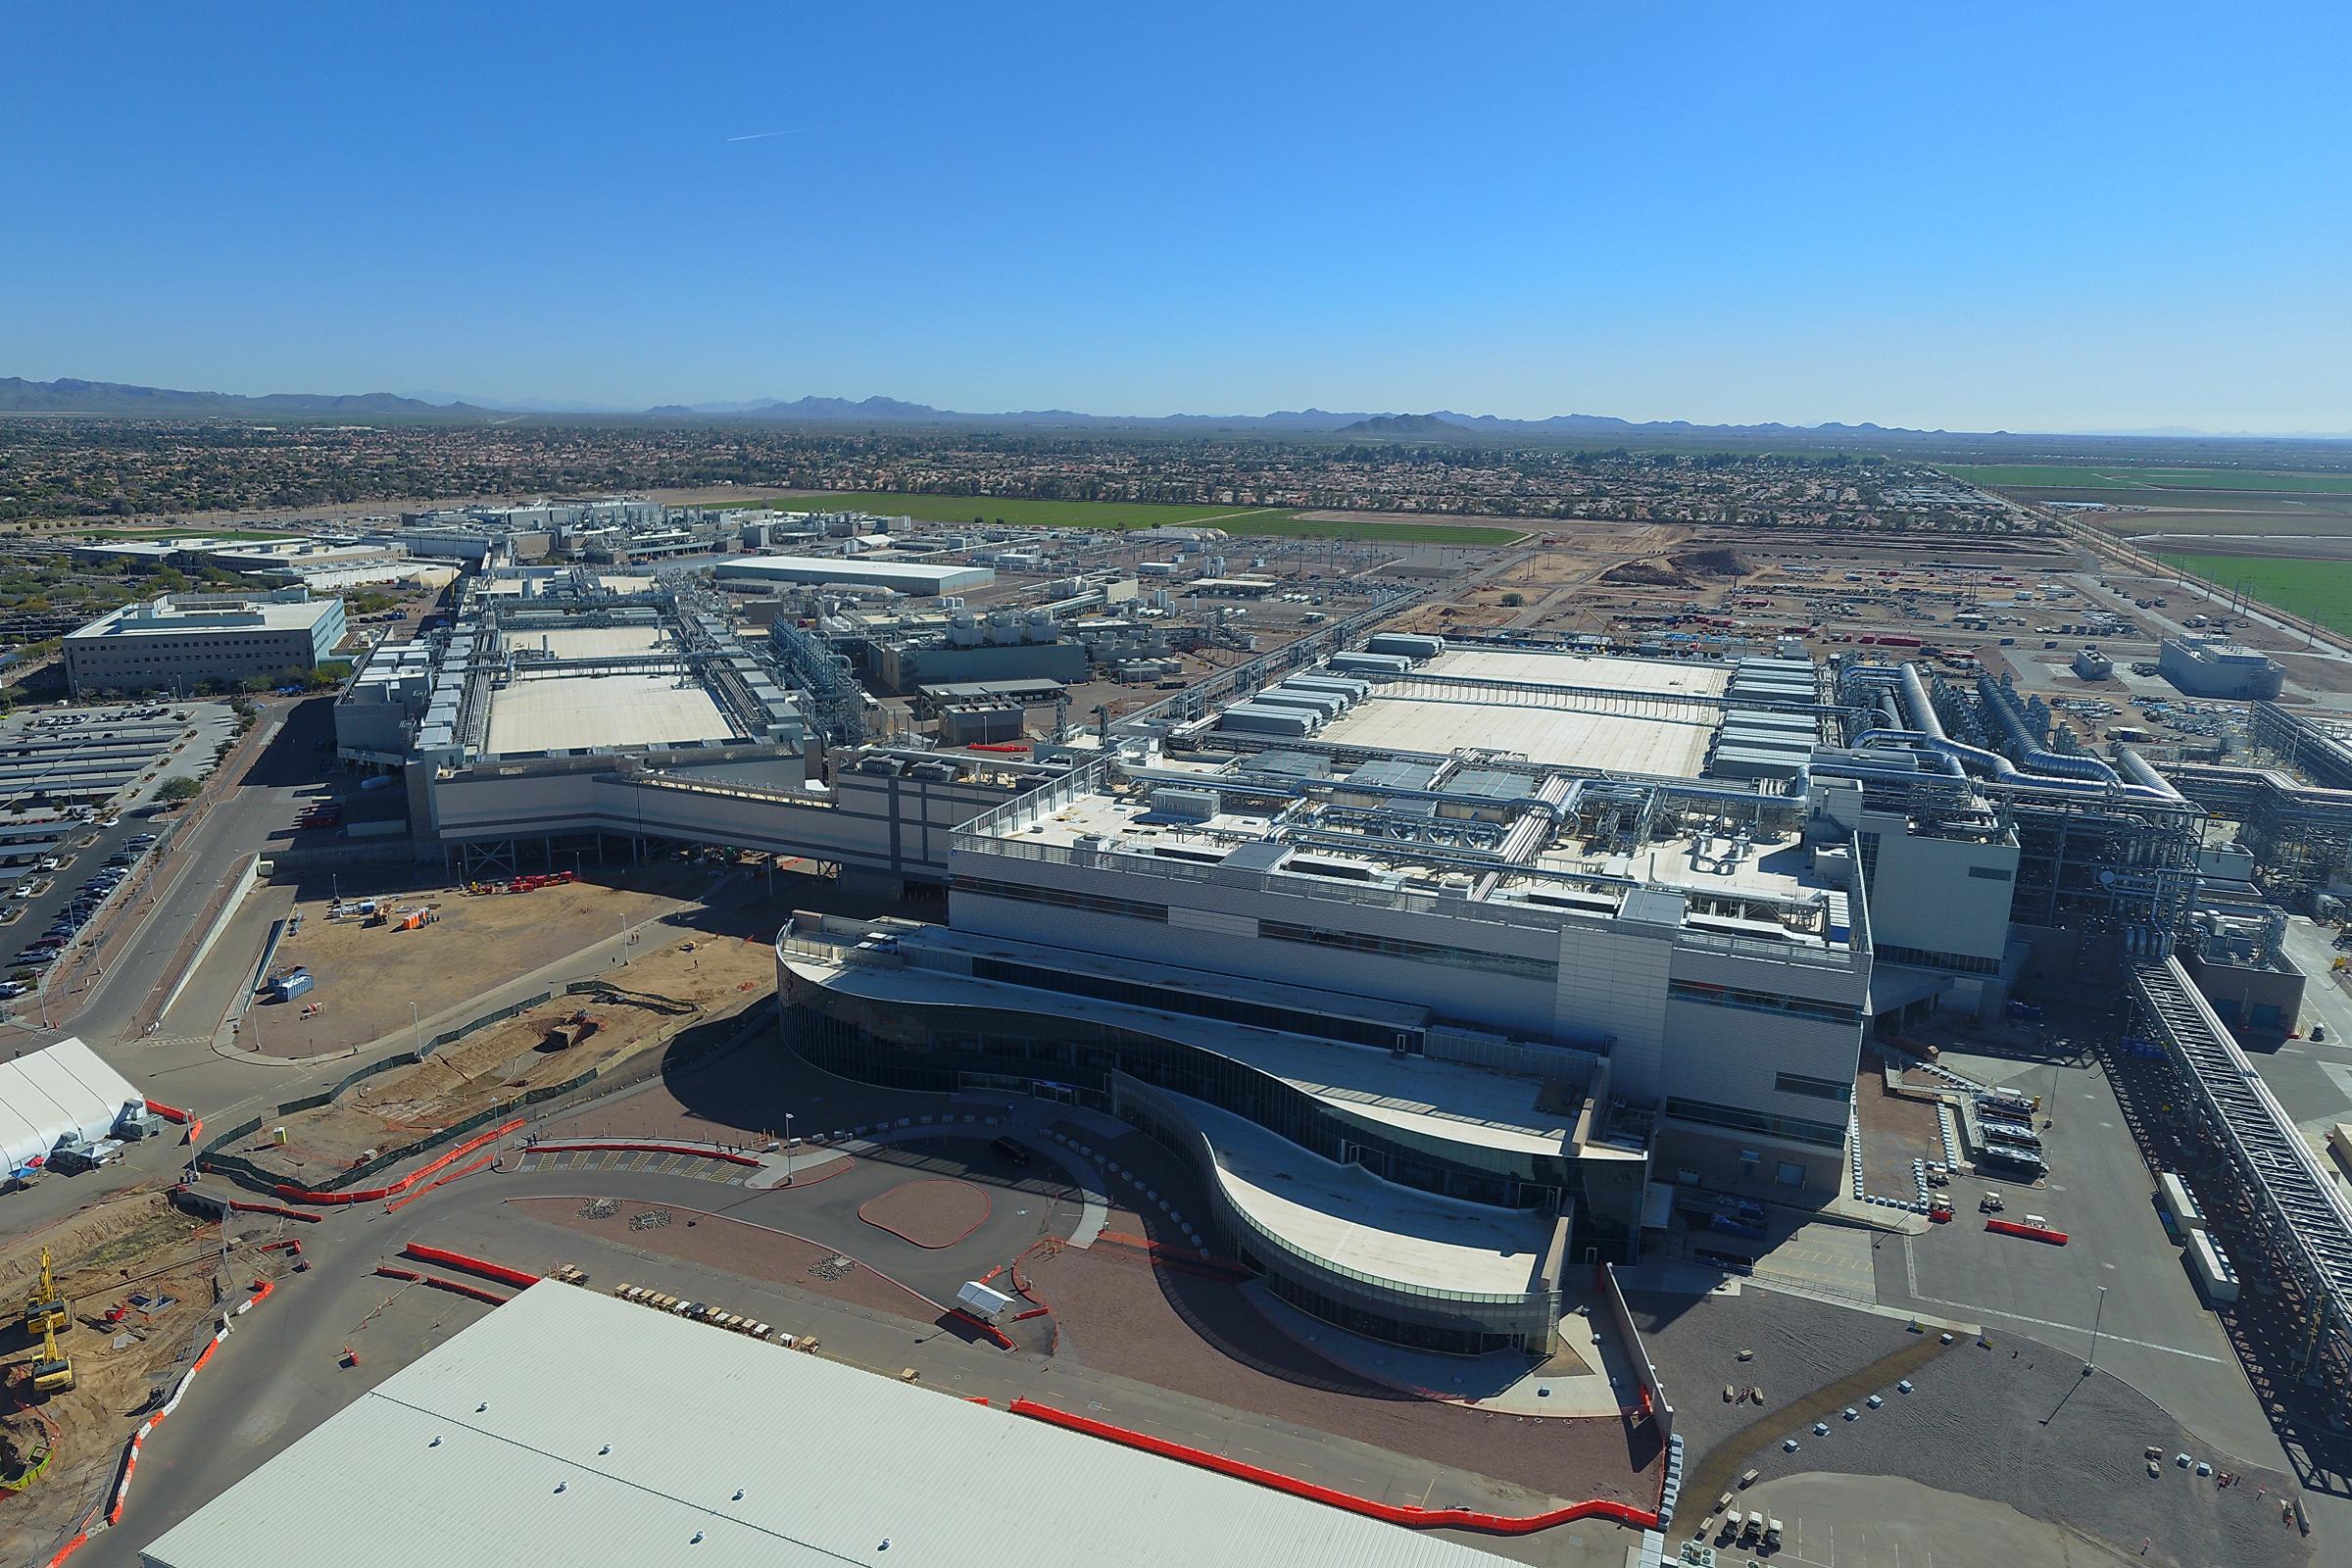 Intel’s newest factory, Fab 42, became fully operational in 2020 on the company’s Ocotillo campus in Chandler, Arizona